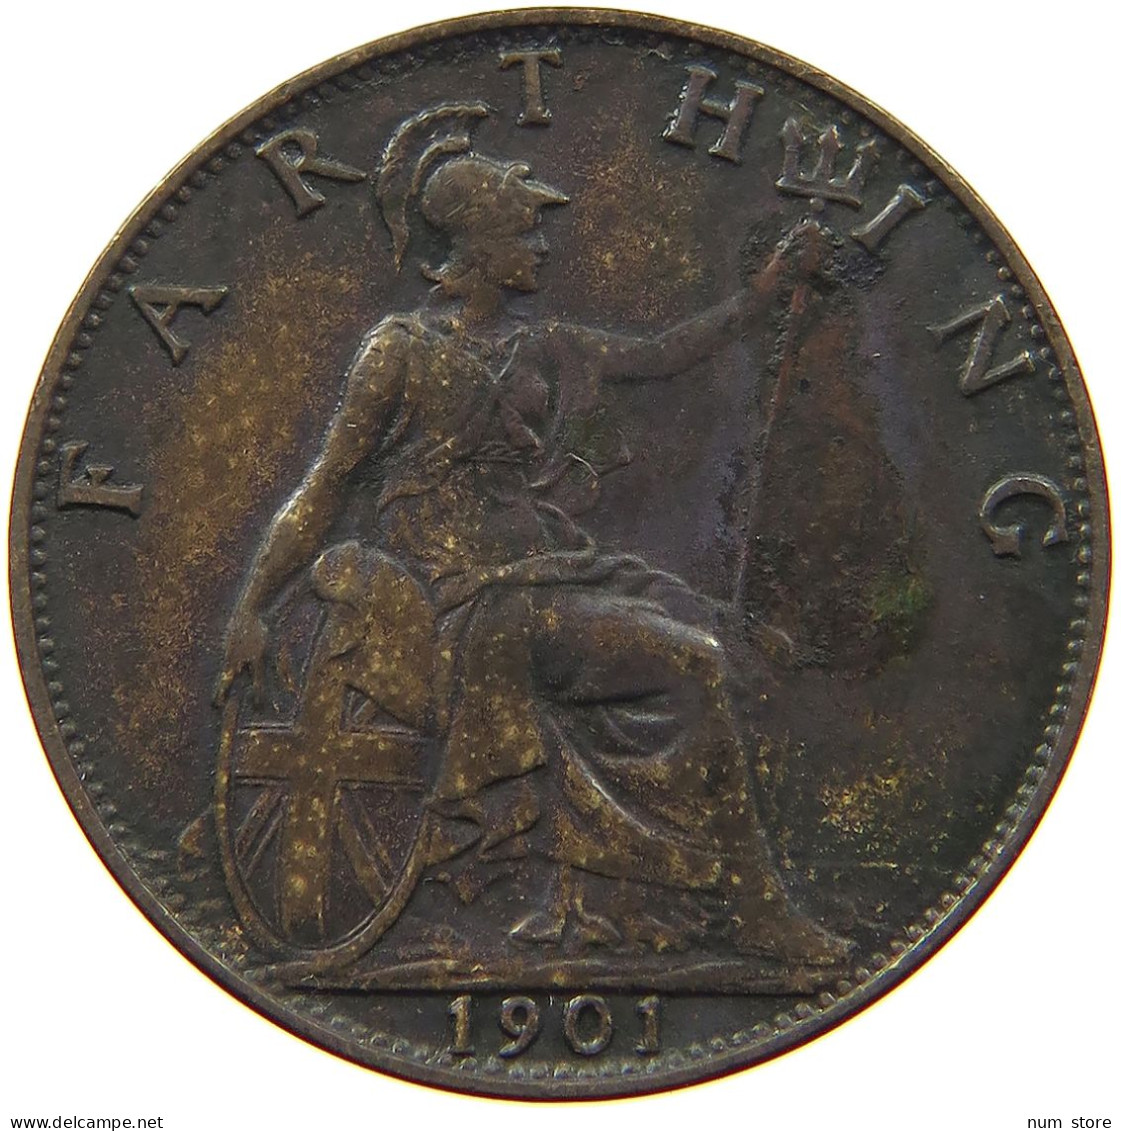 GREAT BRITAIN FARTHING 1901 Victoria 1837-1901 #a011 0955 - B. 1 Farthing